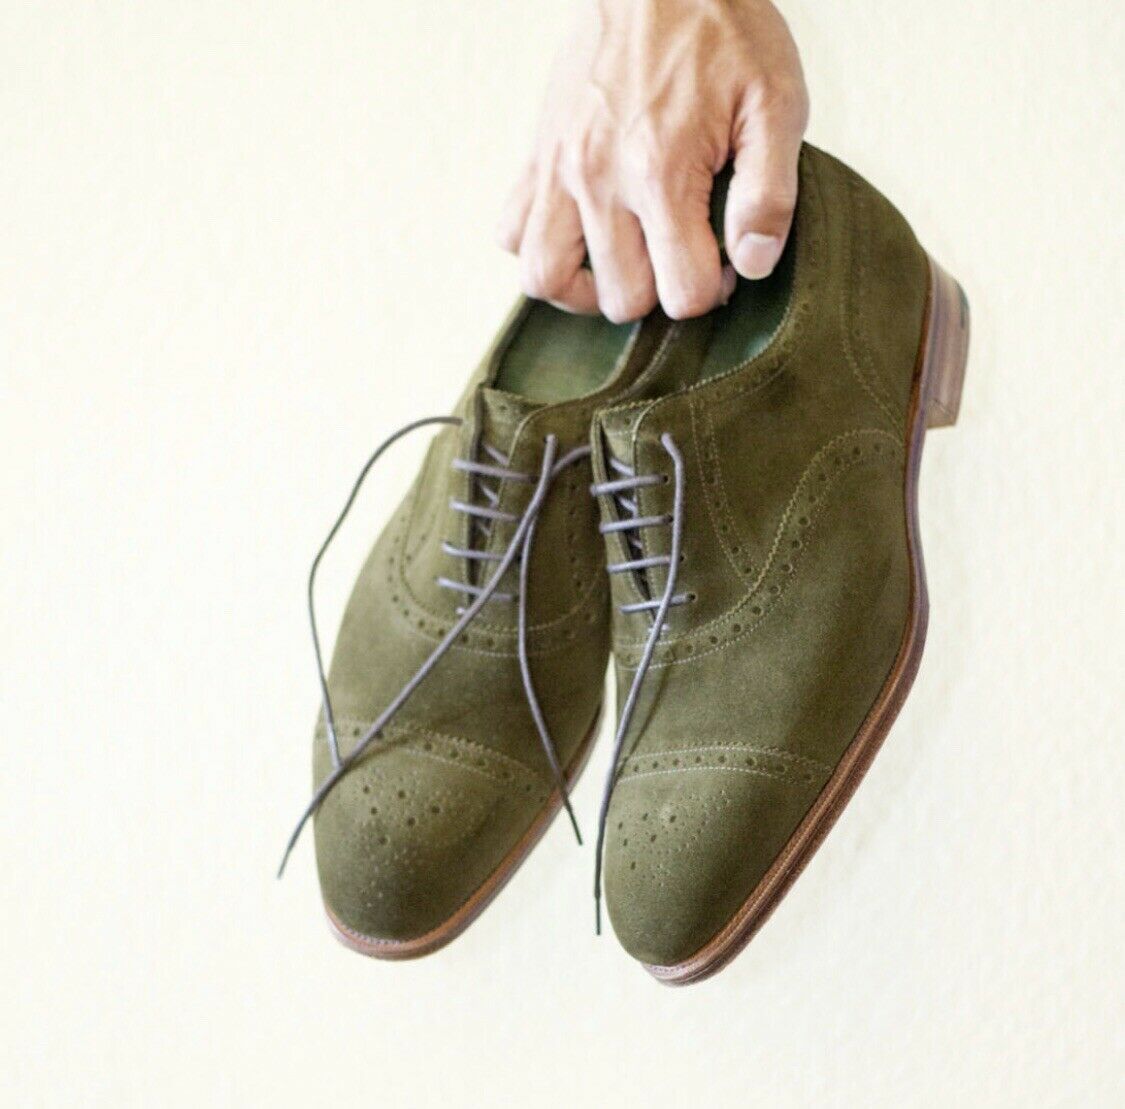 Primary image for Handmade Men Green Suede Heart Medallions Lace Up Oxford Shoes Size US 9